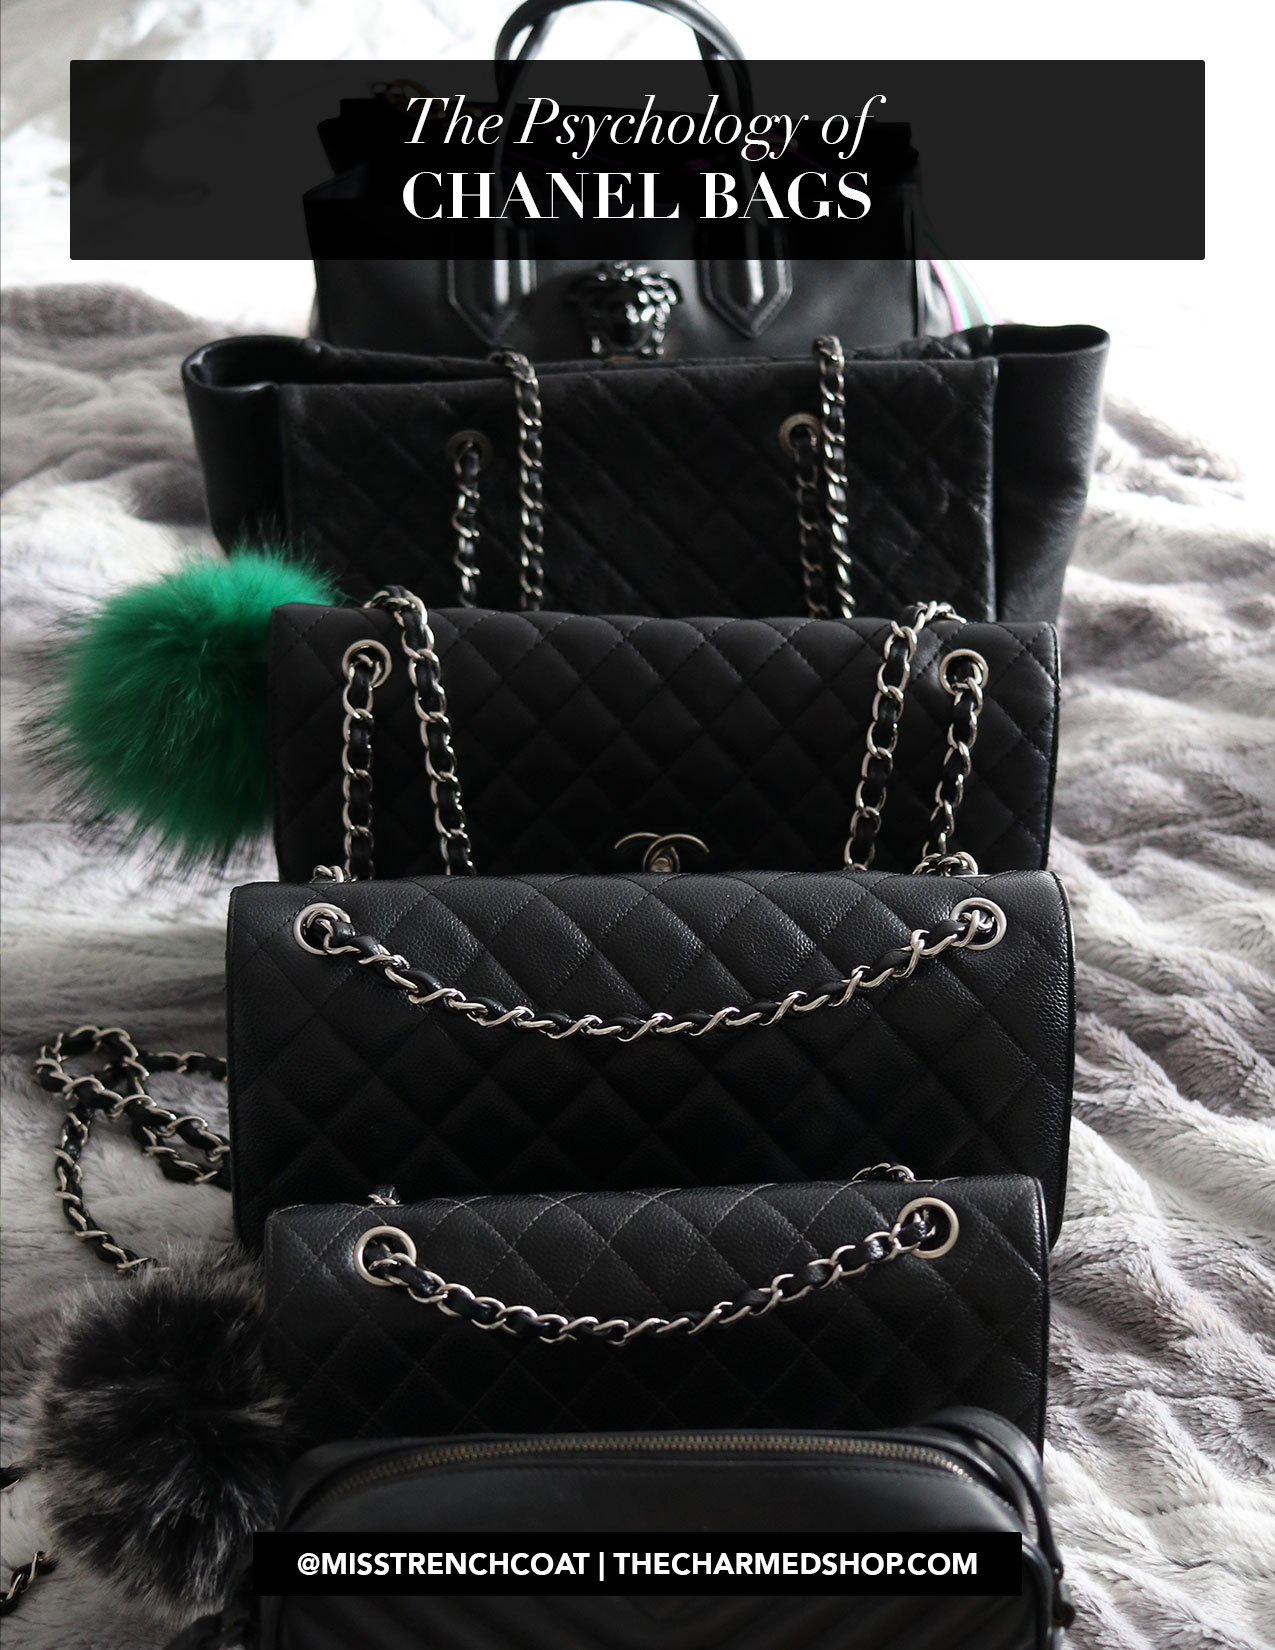 Top 10 Rare Chanel Bags - The Absolute Best Chanel Has to Offer - YouTube